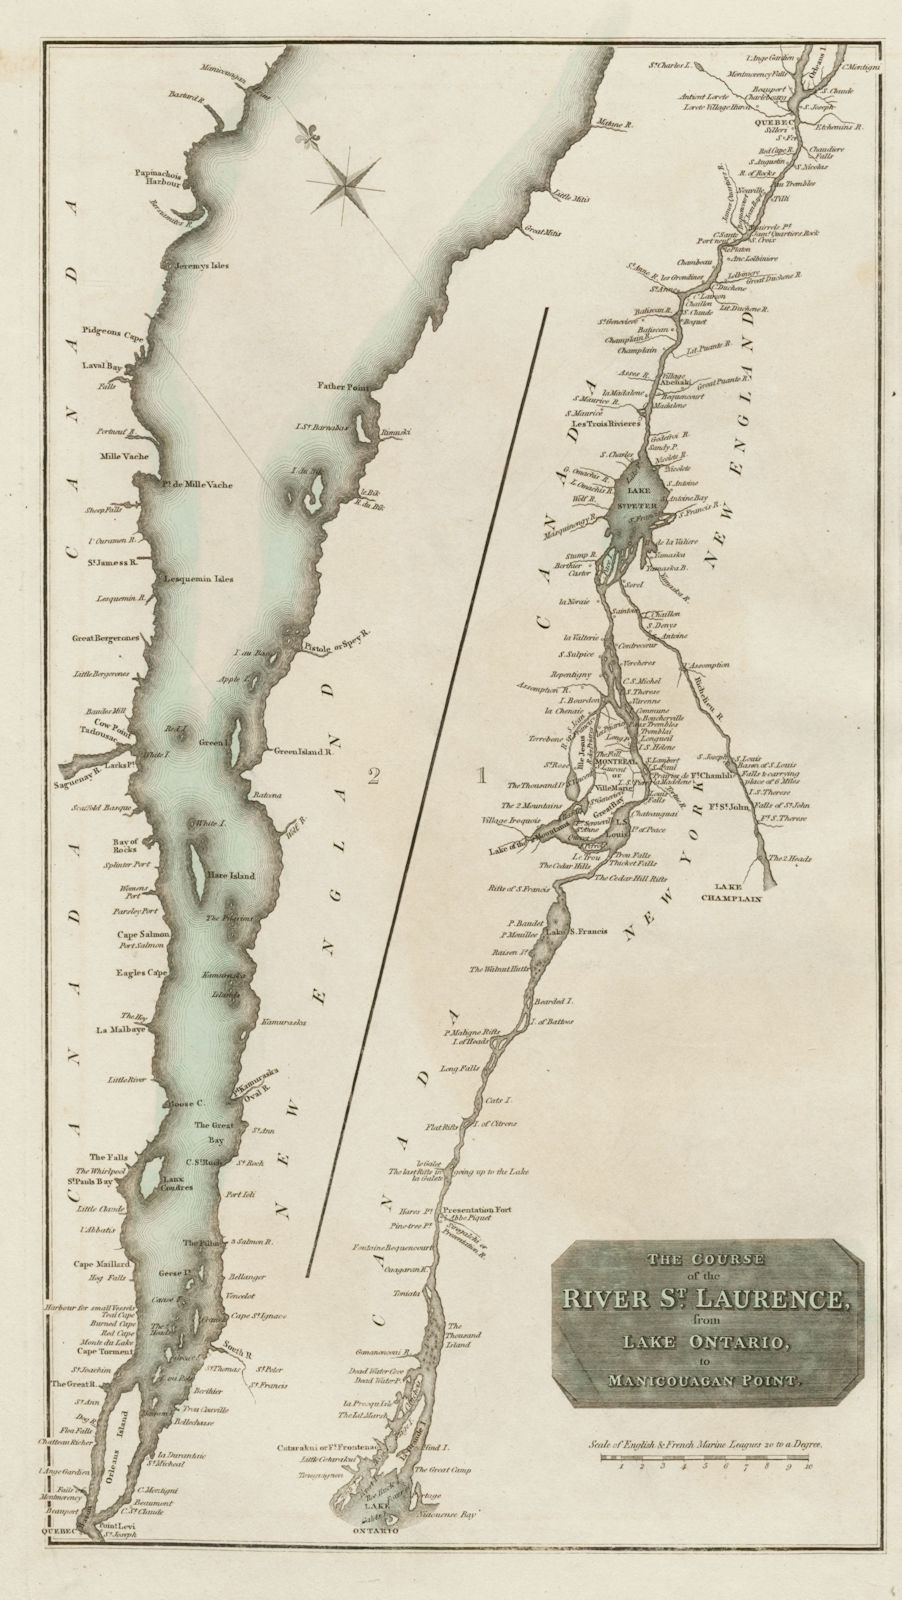 "The course of the River St. Laurence…". St Lawrence, Canada. THOMSON 1817 map